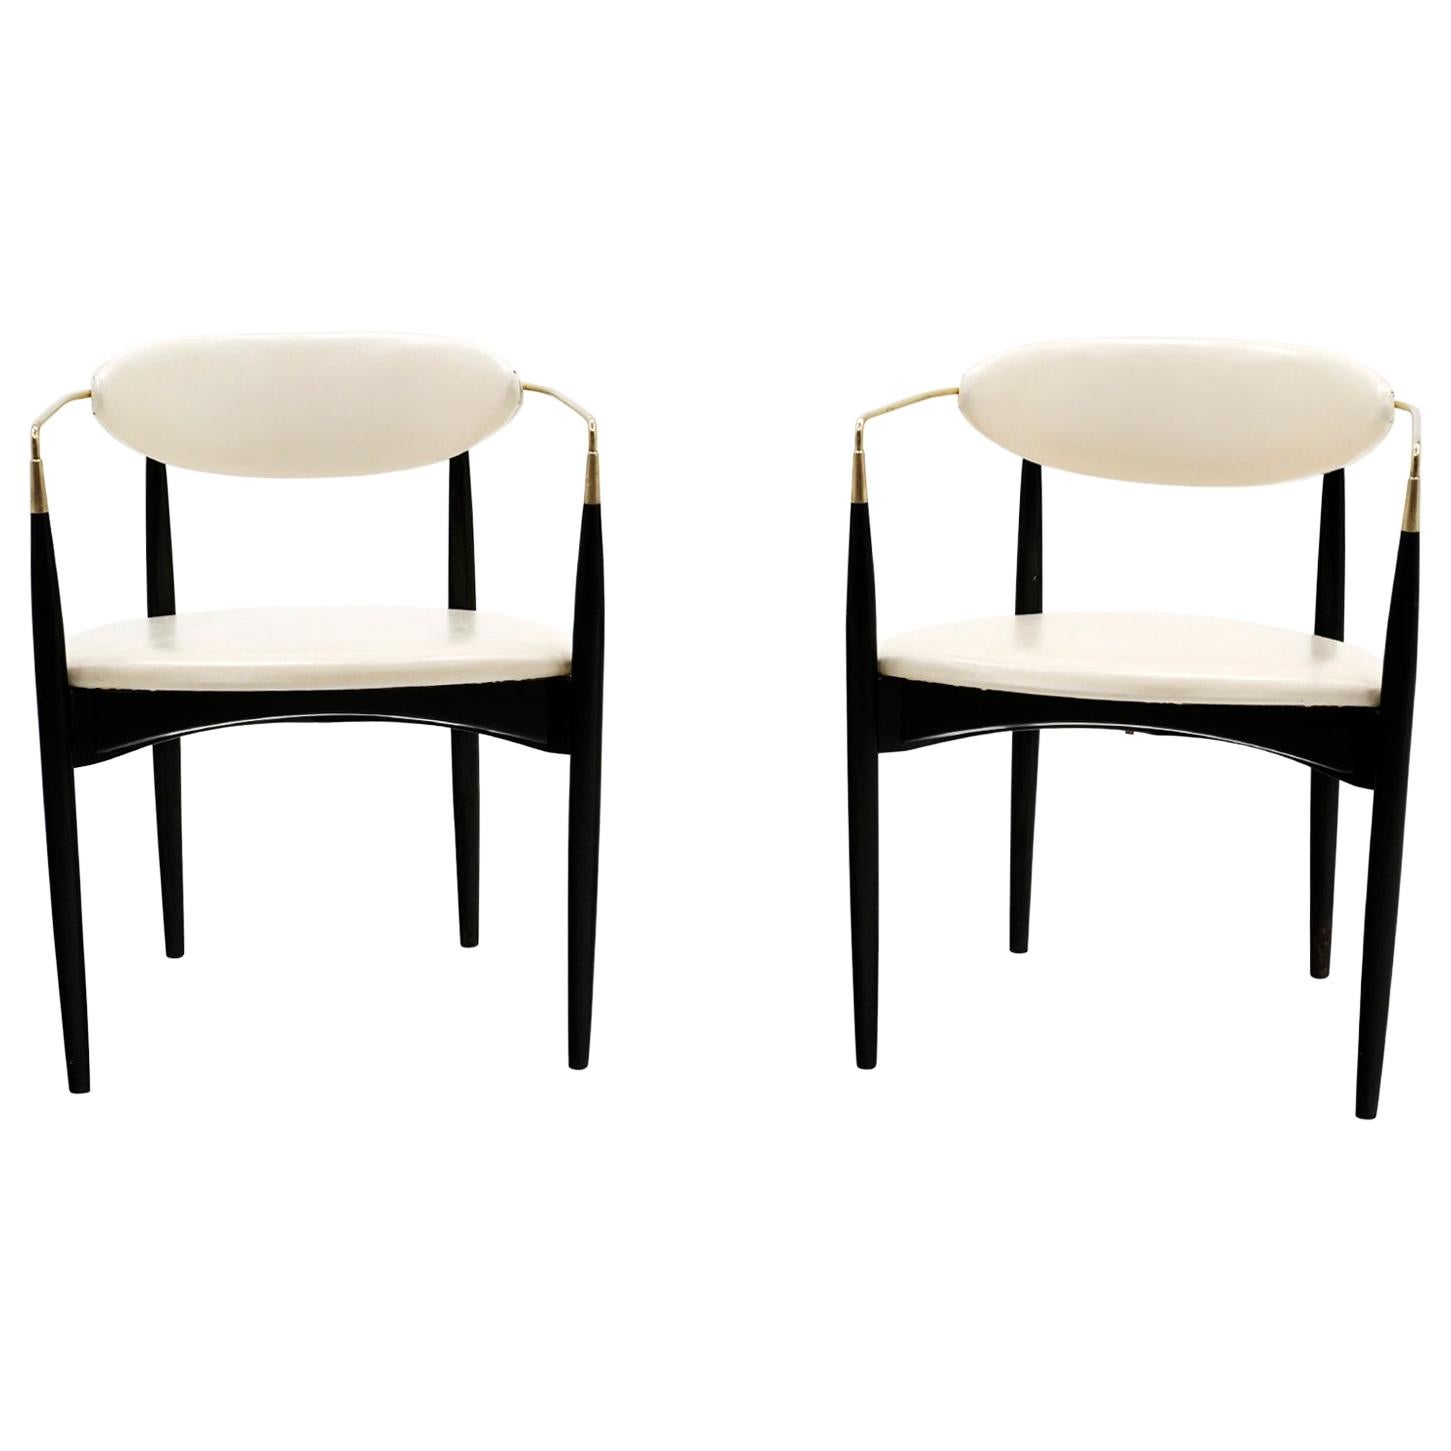 Pair of Viscount Chairs by Dan Johnson, White / Ivory with Brass Arms, Original